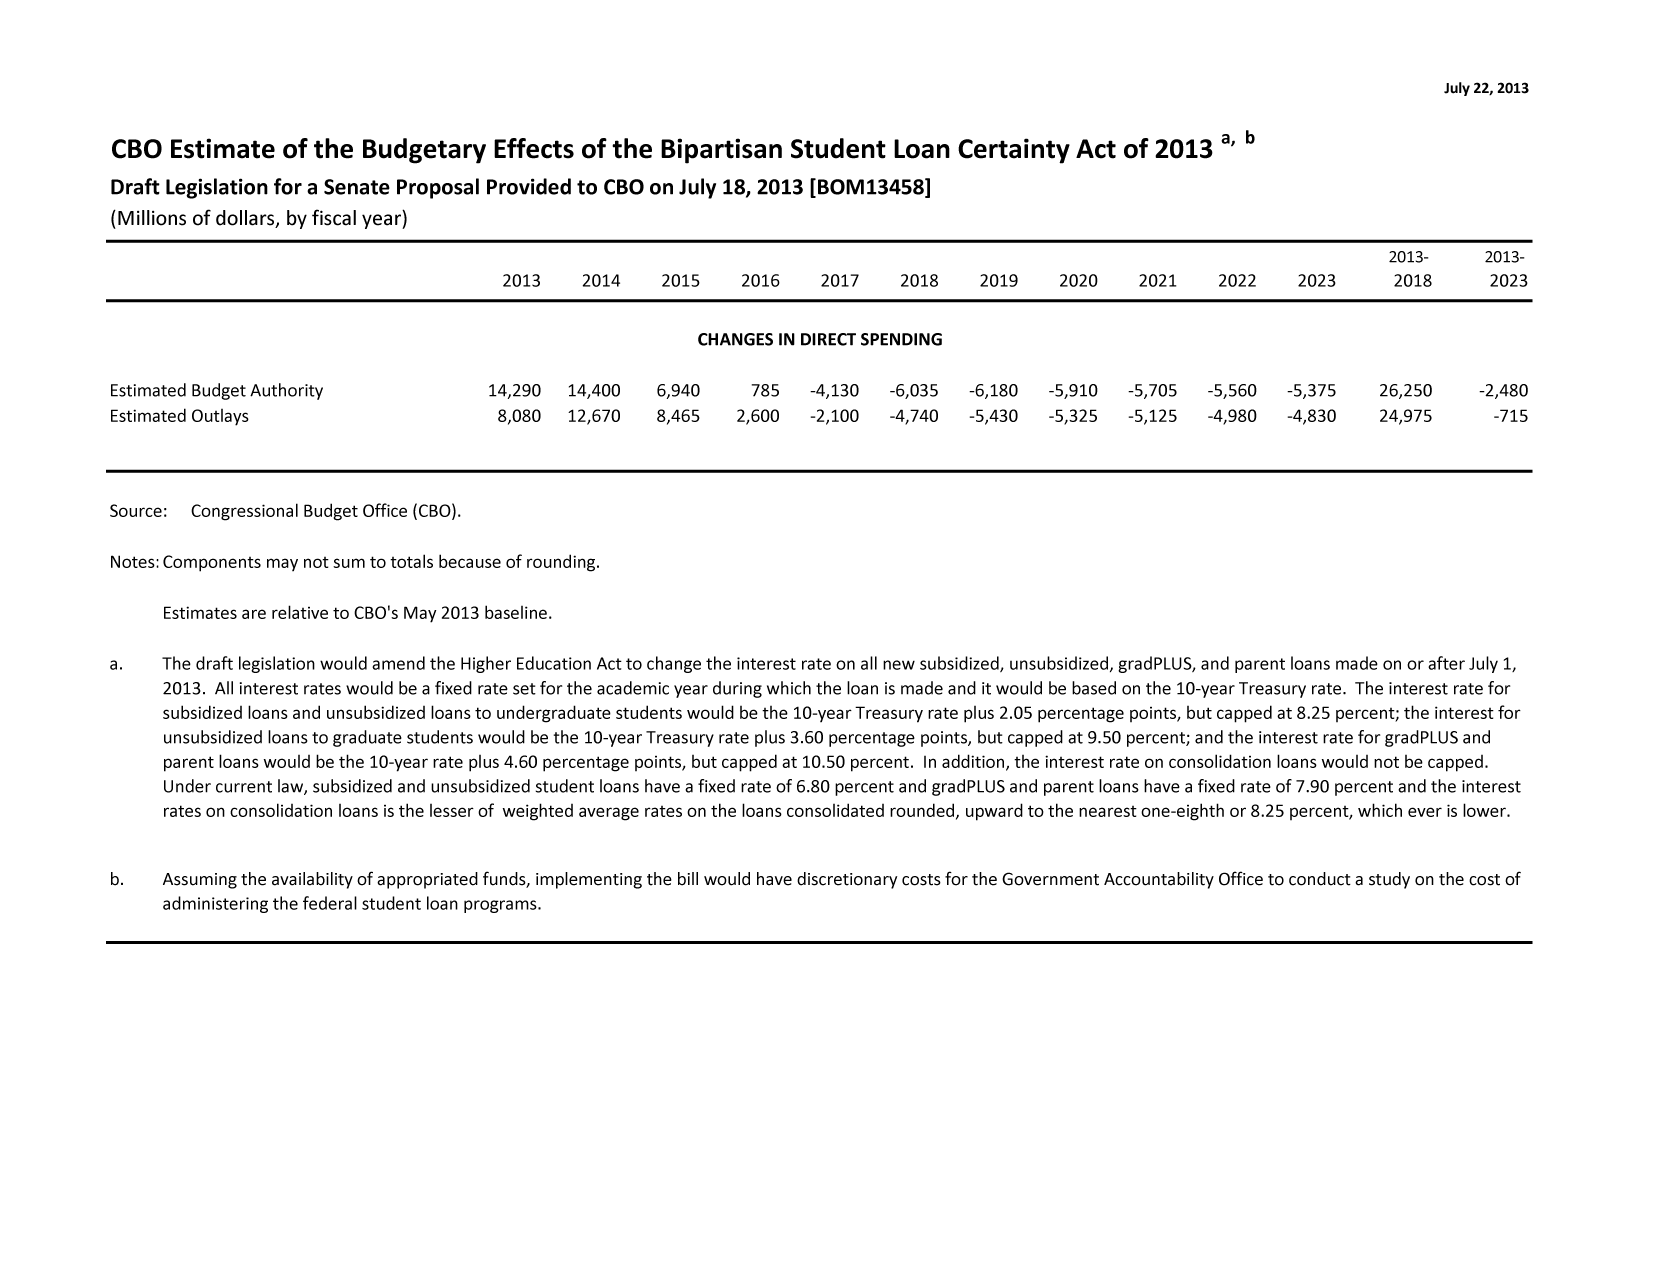 handle is hein.congrec/cbo11222 and id is 1 raw text is: CBO Estimate of the Budgetary Effects of the Bipartisan Student Loan Certainty Act of 2013a,b
Draft Legislation for a Senate Proposal Provided to CBO on July 18, 2013 [BOM13458]
(Millions of dollars, by fiscal year)
2013-     20:
2013    2014     2015    2016     2017    2018    2019     2020    2021    2022     2023      2018      2(
CHANGES IN DIRECT SPENDING
Estimated Budget Authority              14,290  14,400    6,940    785    -4,130  -6,035  -6,180   -5,910  -5,705  -5,560   -5,375    26,250    -2,4
Estimated Outlays                        8,080  12,670    8,465   2,600   -2,100  -4,740  -5,430   -5,325  -5,125  -4,980   -4,830    24,975      -
Source:  Congressional Budget Office (CBO).
Notes: Components may not sum to totals because of rounding.
Estimates are relative to CBO's May 2013 baseline.
a.    The draft legislation would amend the Higher Education Act to change the interest rate on all new subsidized, unsubsidized, gradPLUS, and parent loans made on or after July
2013. All interest rates would be a fixed rate set for the academic year during which the loan is made and it would be based on the 10-year Treasury rate. The interest rate fo
subsidized loans and unsubsidized loans to undergraduate students would be the 10-year Treasury rate plus 2.05 percentage points, but capped at 8.25 percent; the interest f
unsubsidized loans to graduate students would be the 10-year Treasury rate plus 3.60 percentage points, but capped at 9.50 percent; and the interest rate for gradPLUS and
parent loans would be the 10-year rate plus 4.60 percentage points, but capped at 10.50 percent. In addition, the interest rate on consolidation loans would not be capped.
Under current law, subsidized and unsubsidized student loans have a fixed rate of 6.80 percent and gradPLUS and parent loans have a fixed rate of 7.90 percent and the intere
rates on consolidation loans is the lesser of weighted average rates on the loans consolidated rounded, upward to the nearest one-eighth or 8.25 percent, which ever is lower
b.   Assuming the availability of appropriated funds, implementing the bill would have discretionary costs for the Government Accountability Office to conduct a study on the cost
administering the federal student loan programs.

13-
)23
180
715
ir
:or
?st
of

July 22, 2013


